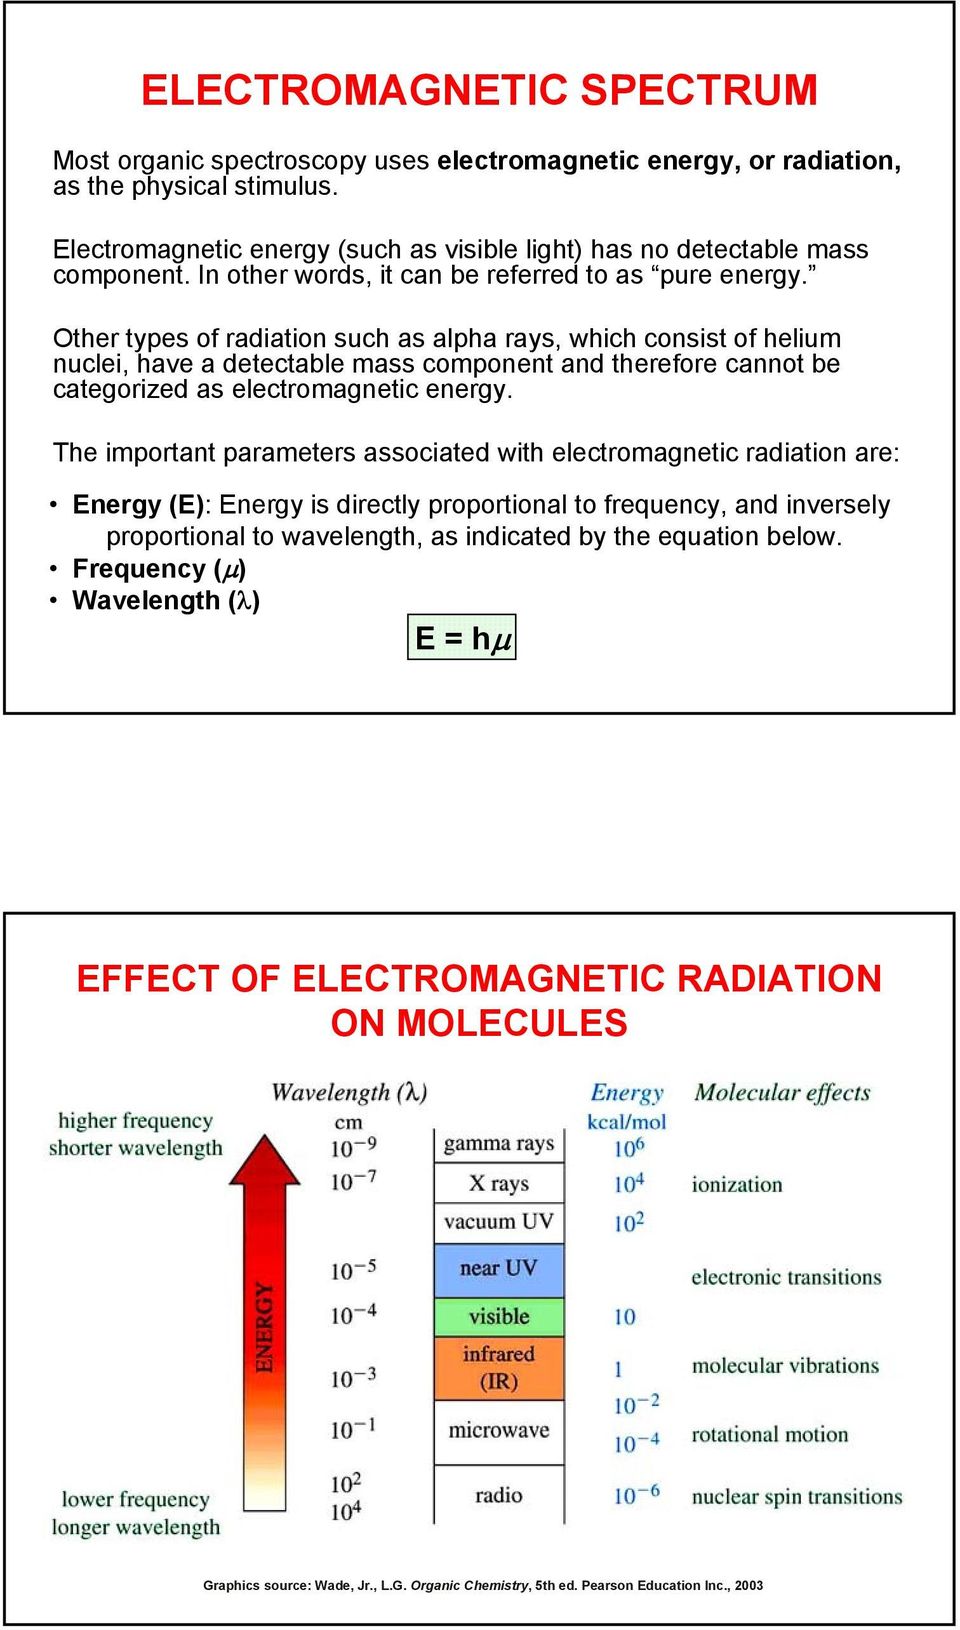 Other types of radiation such as alpha rays, which consist of helium nuclei, have a detectable mass component and therefore cannot be categorized as electromagnetic energy.